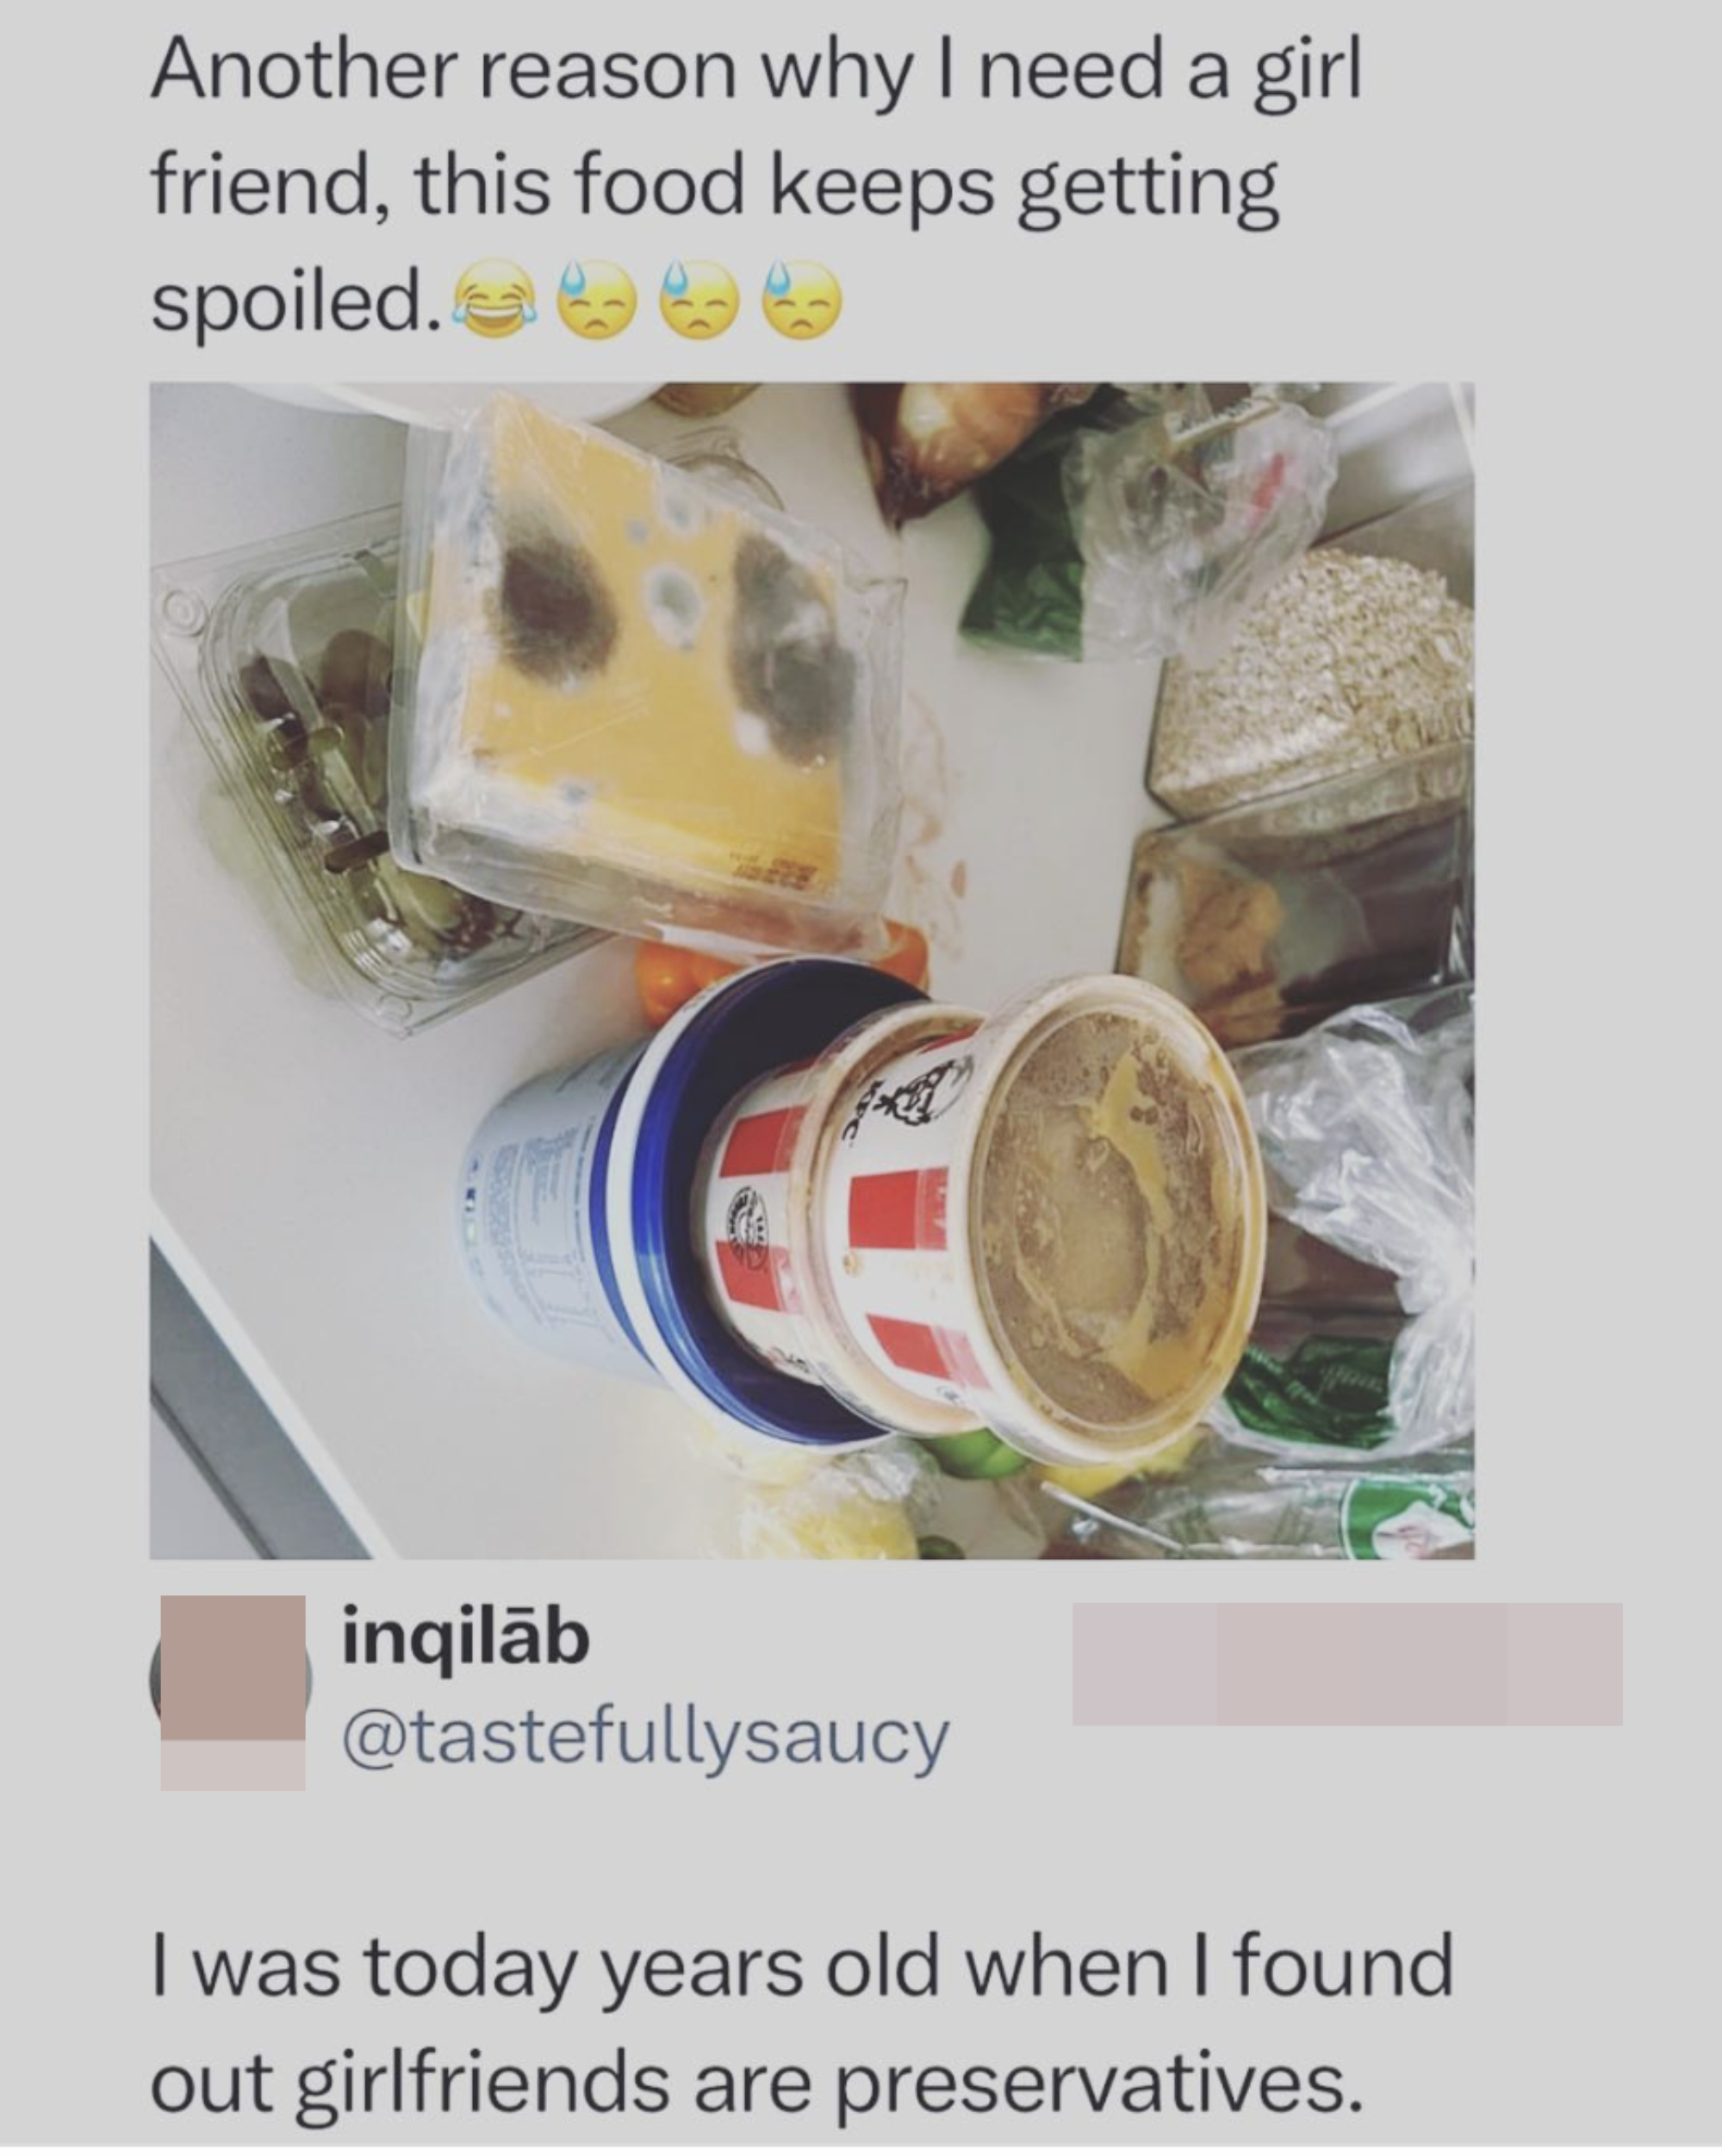 Person posts a photo of fast food containers with caption &quot;Another reason why I need a girlfriend, this food keeps getting spoiled, and someone responds, &quot;I was today years old when I found out girlfriends are preservatives&quot;